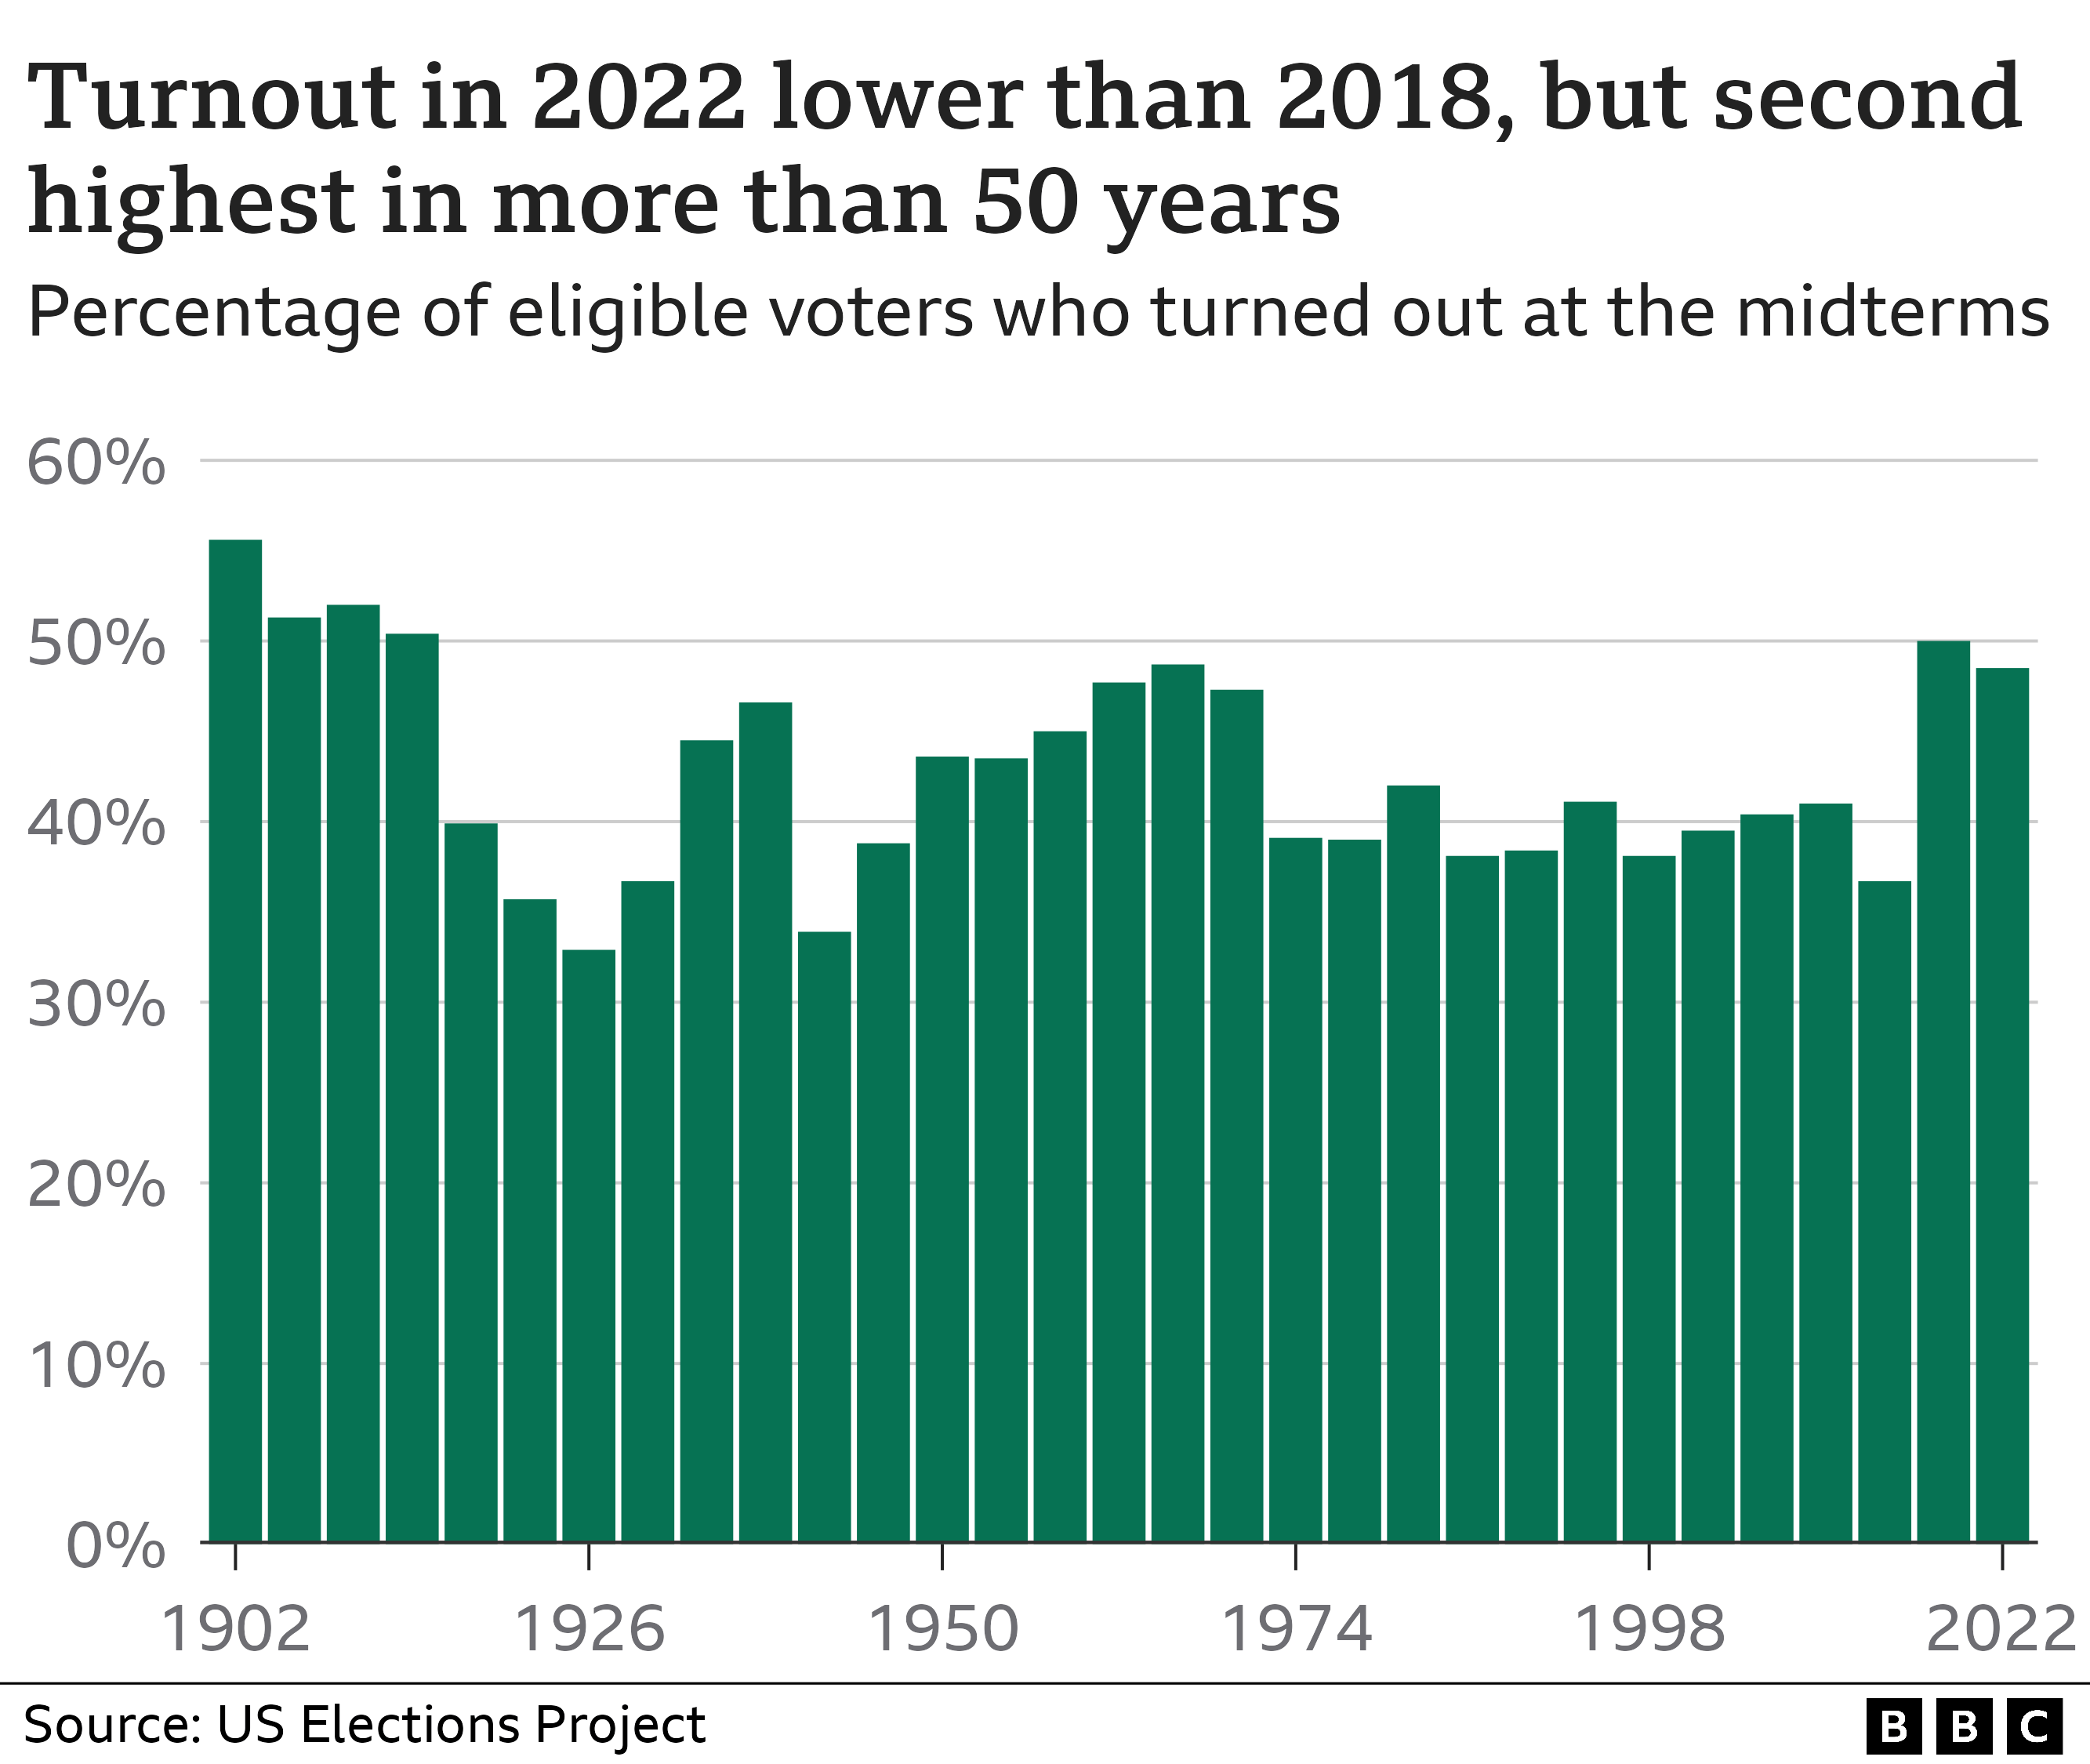 Turnout was the second highest for 50 years